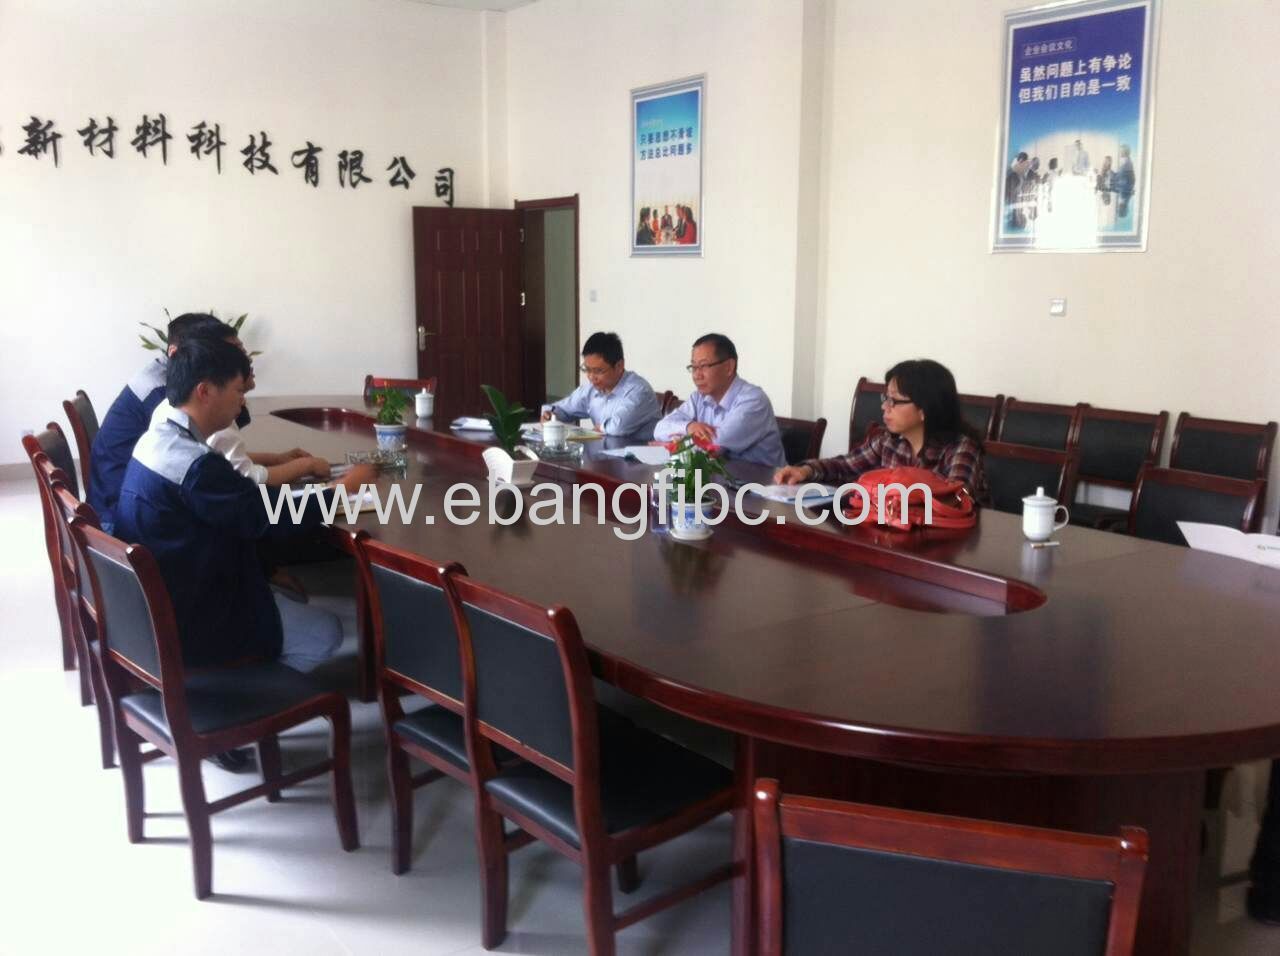 Officials from entry-exit inspection and quarantine bureau visit Ebang-FIBC